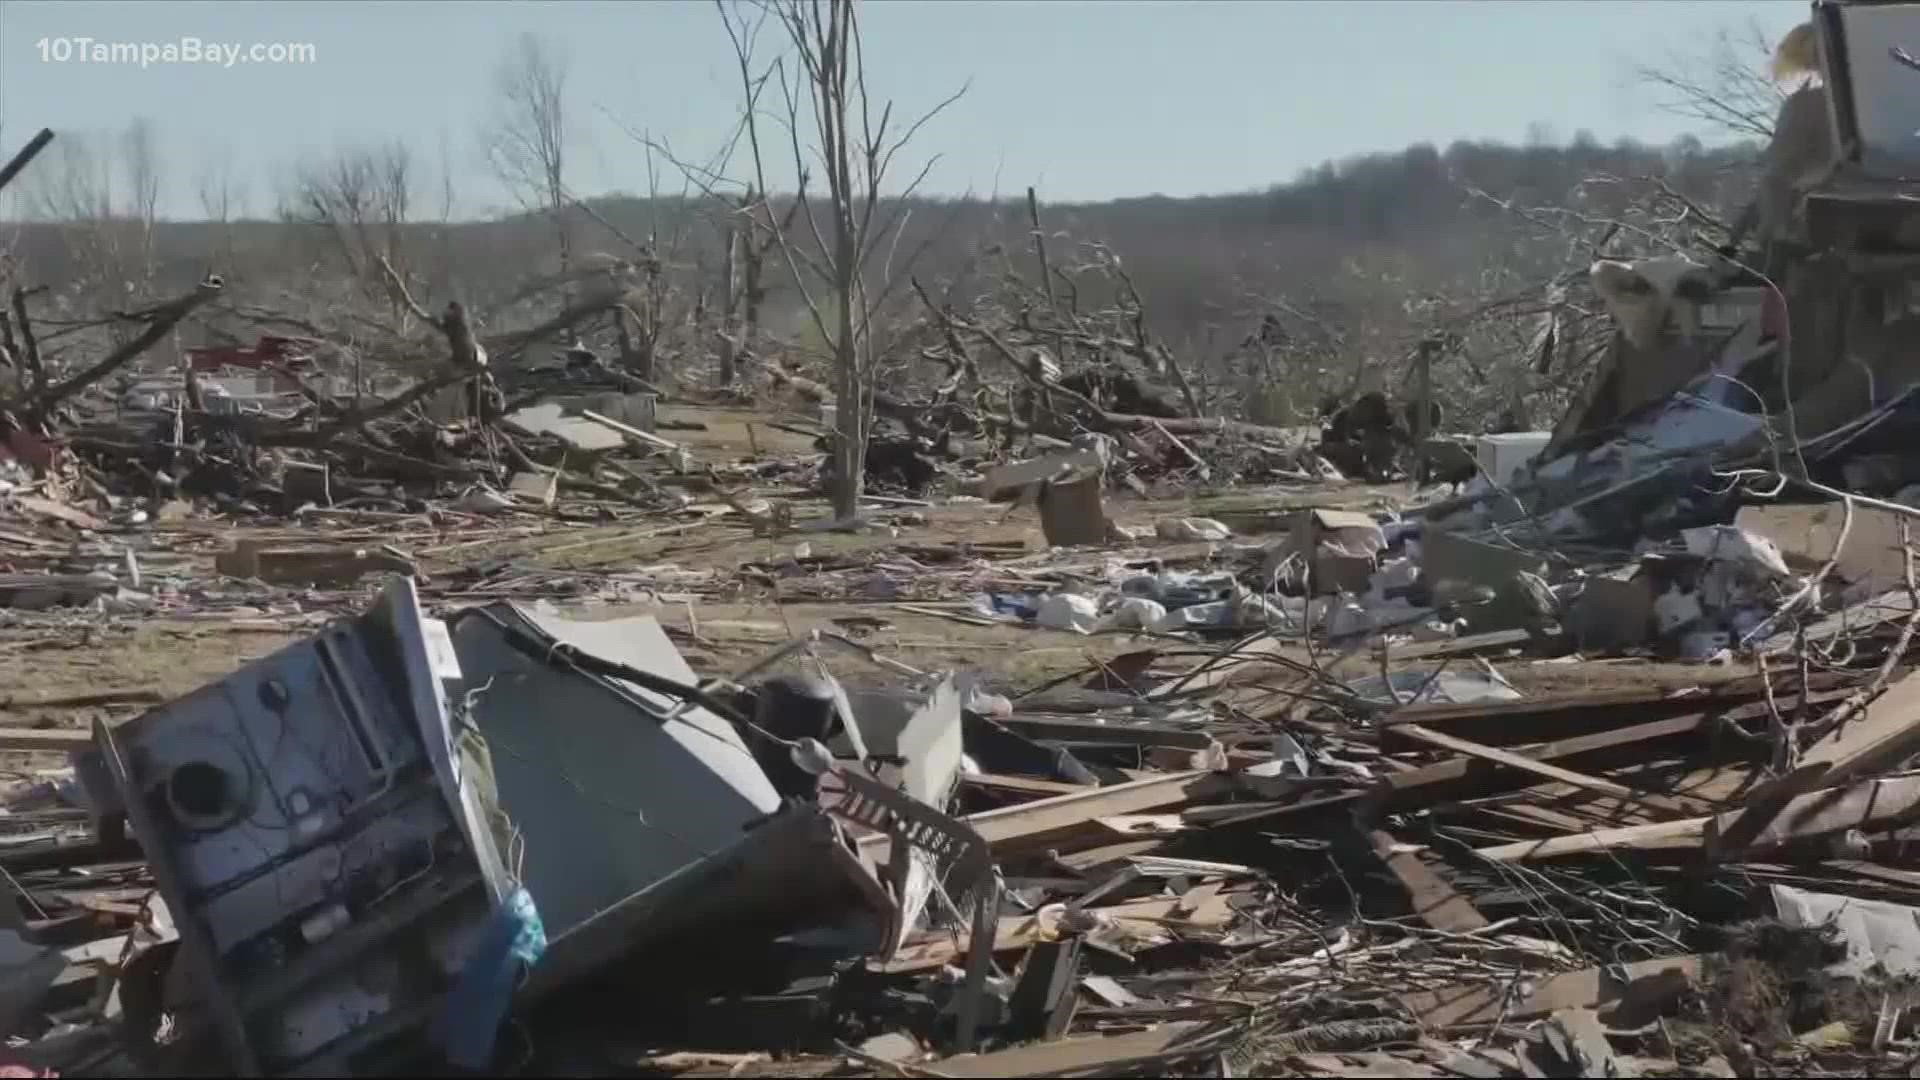 Kentucky authorities said the sheer level of destruction was hindering their ability to tally the devastation from Friday night's storms.